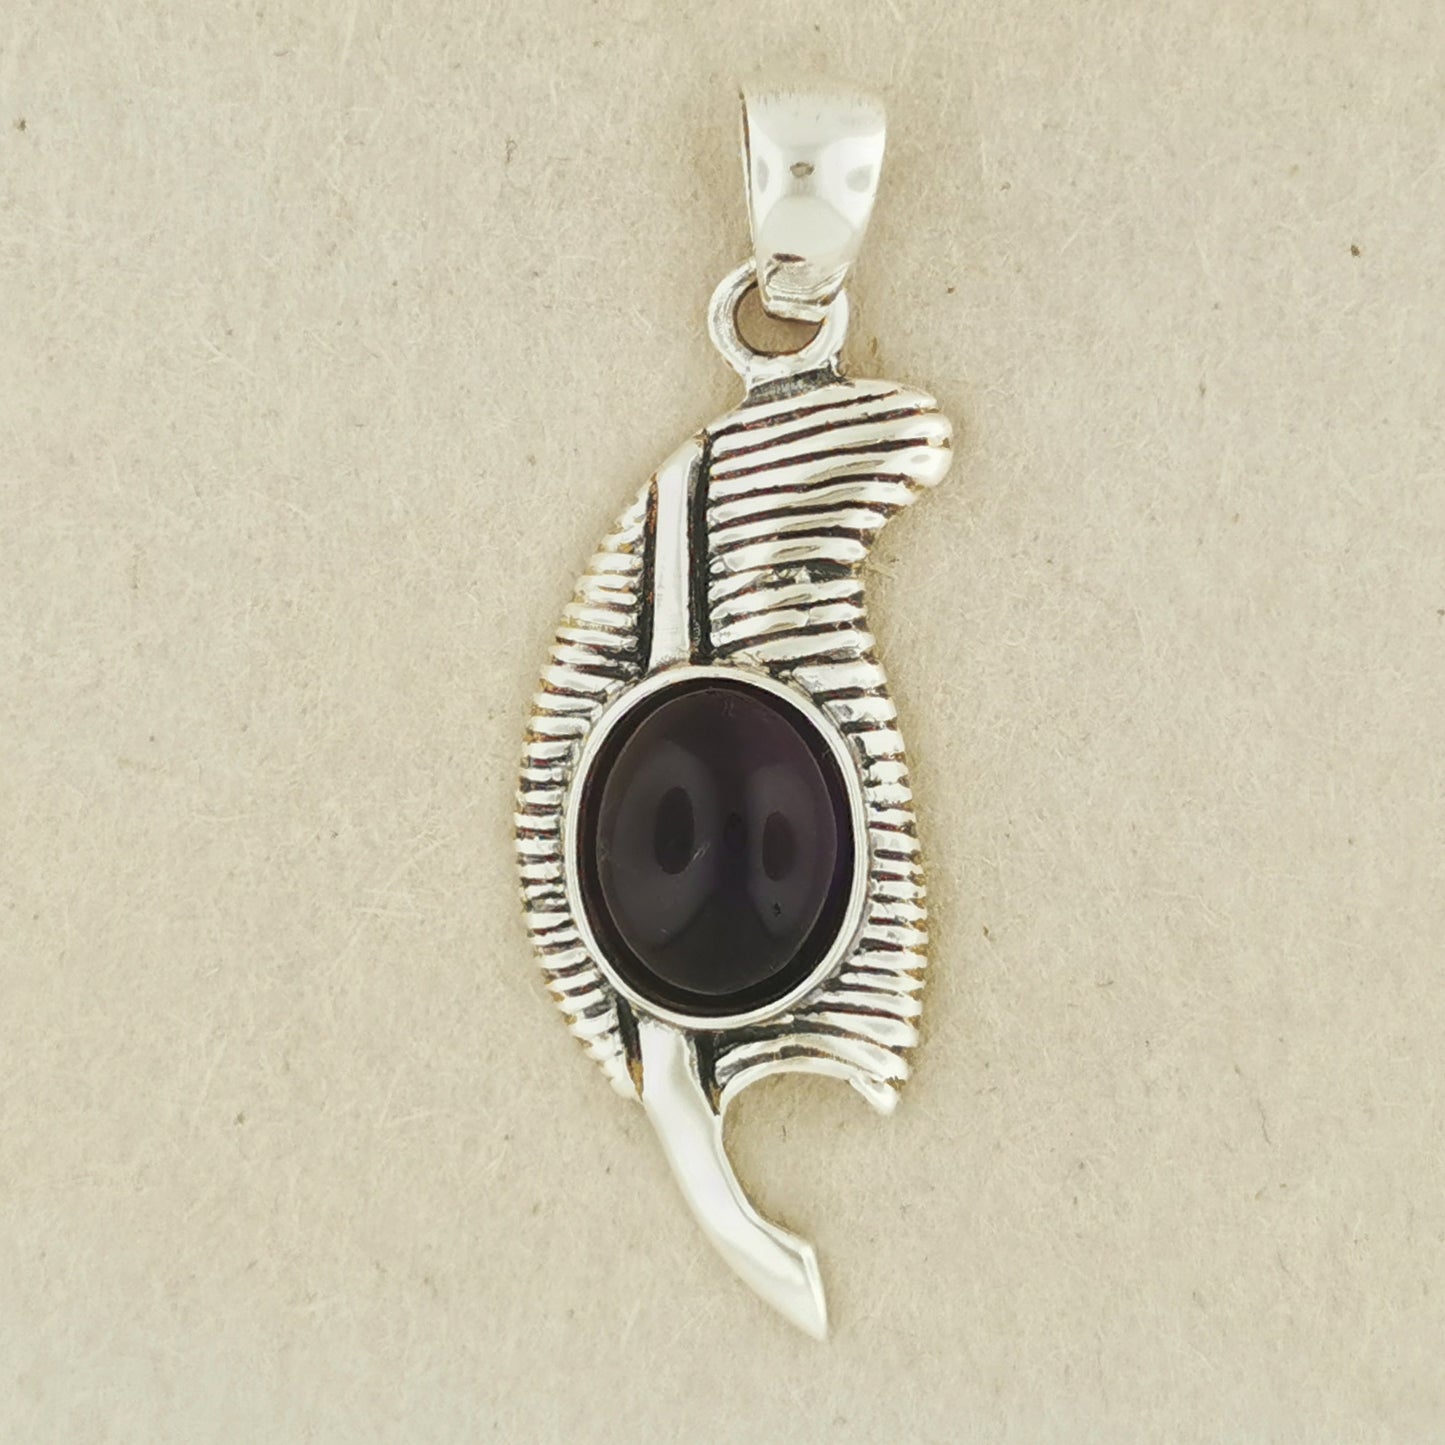 Feather of Ma'at Pendant in Sterling Silver with Dark Amethyst, Egyptian Feather Pendant, Egyptian Goddess Pendant, Goddess of Truth Pendant, Silver Egyptian Feather Pendant, Silver Ma’at Pendant, Egyptian Silver Pendant, Silver Gemstone Egyptian Feather Pendant